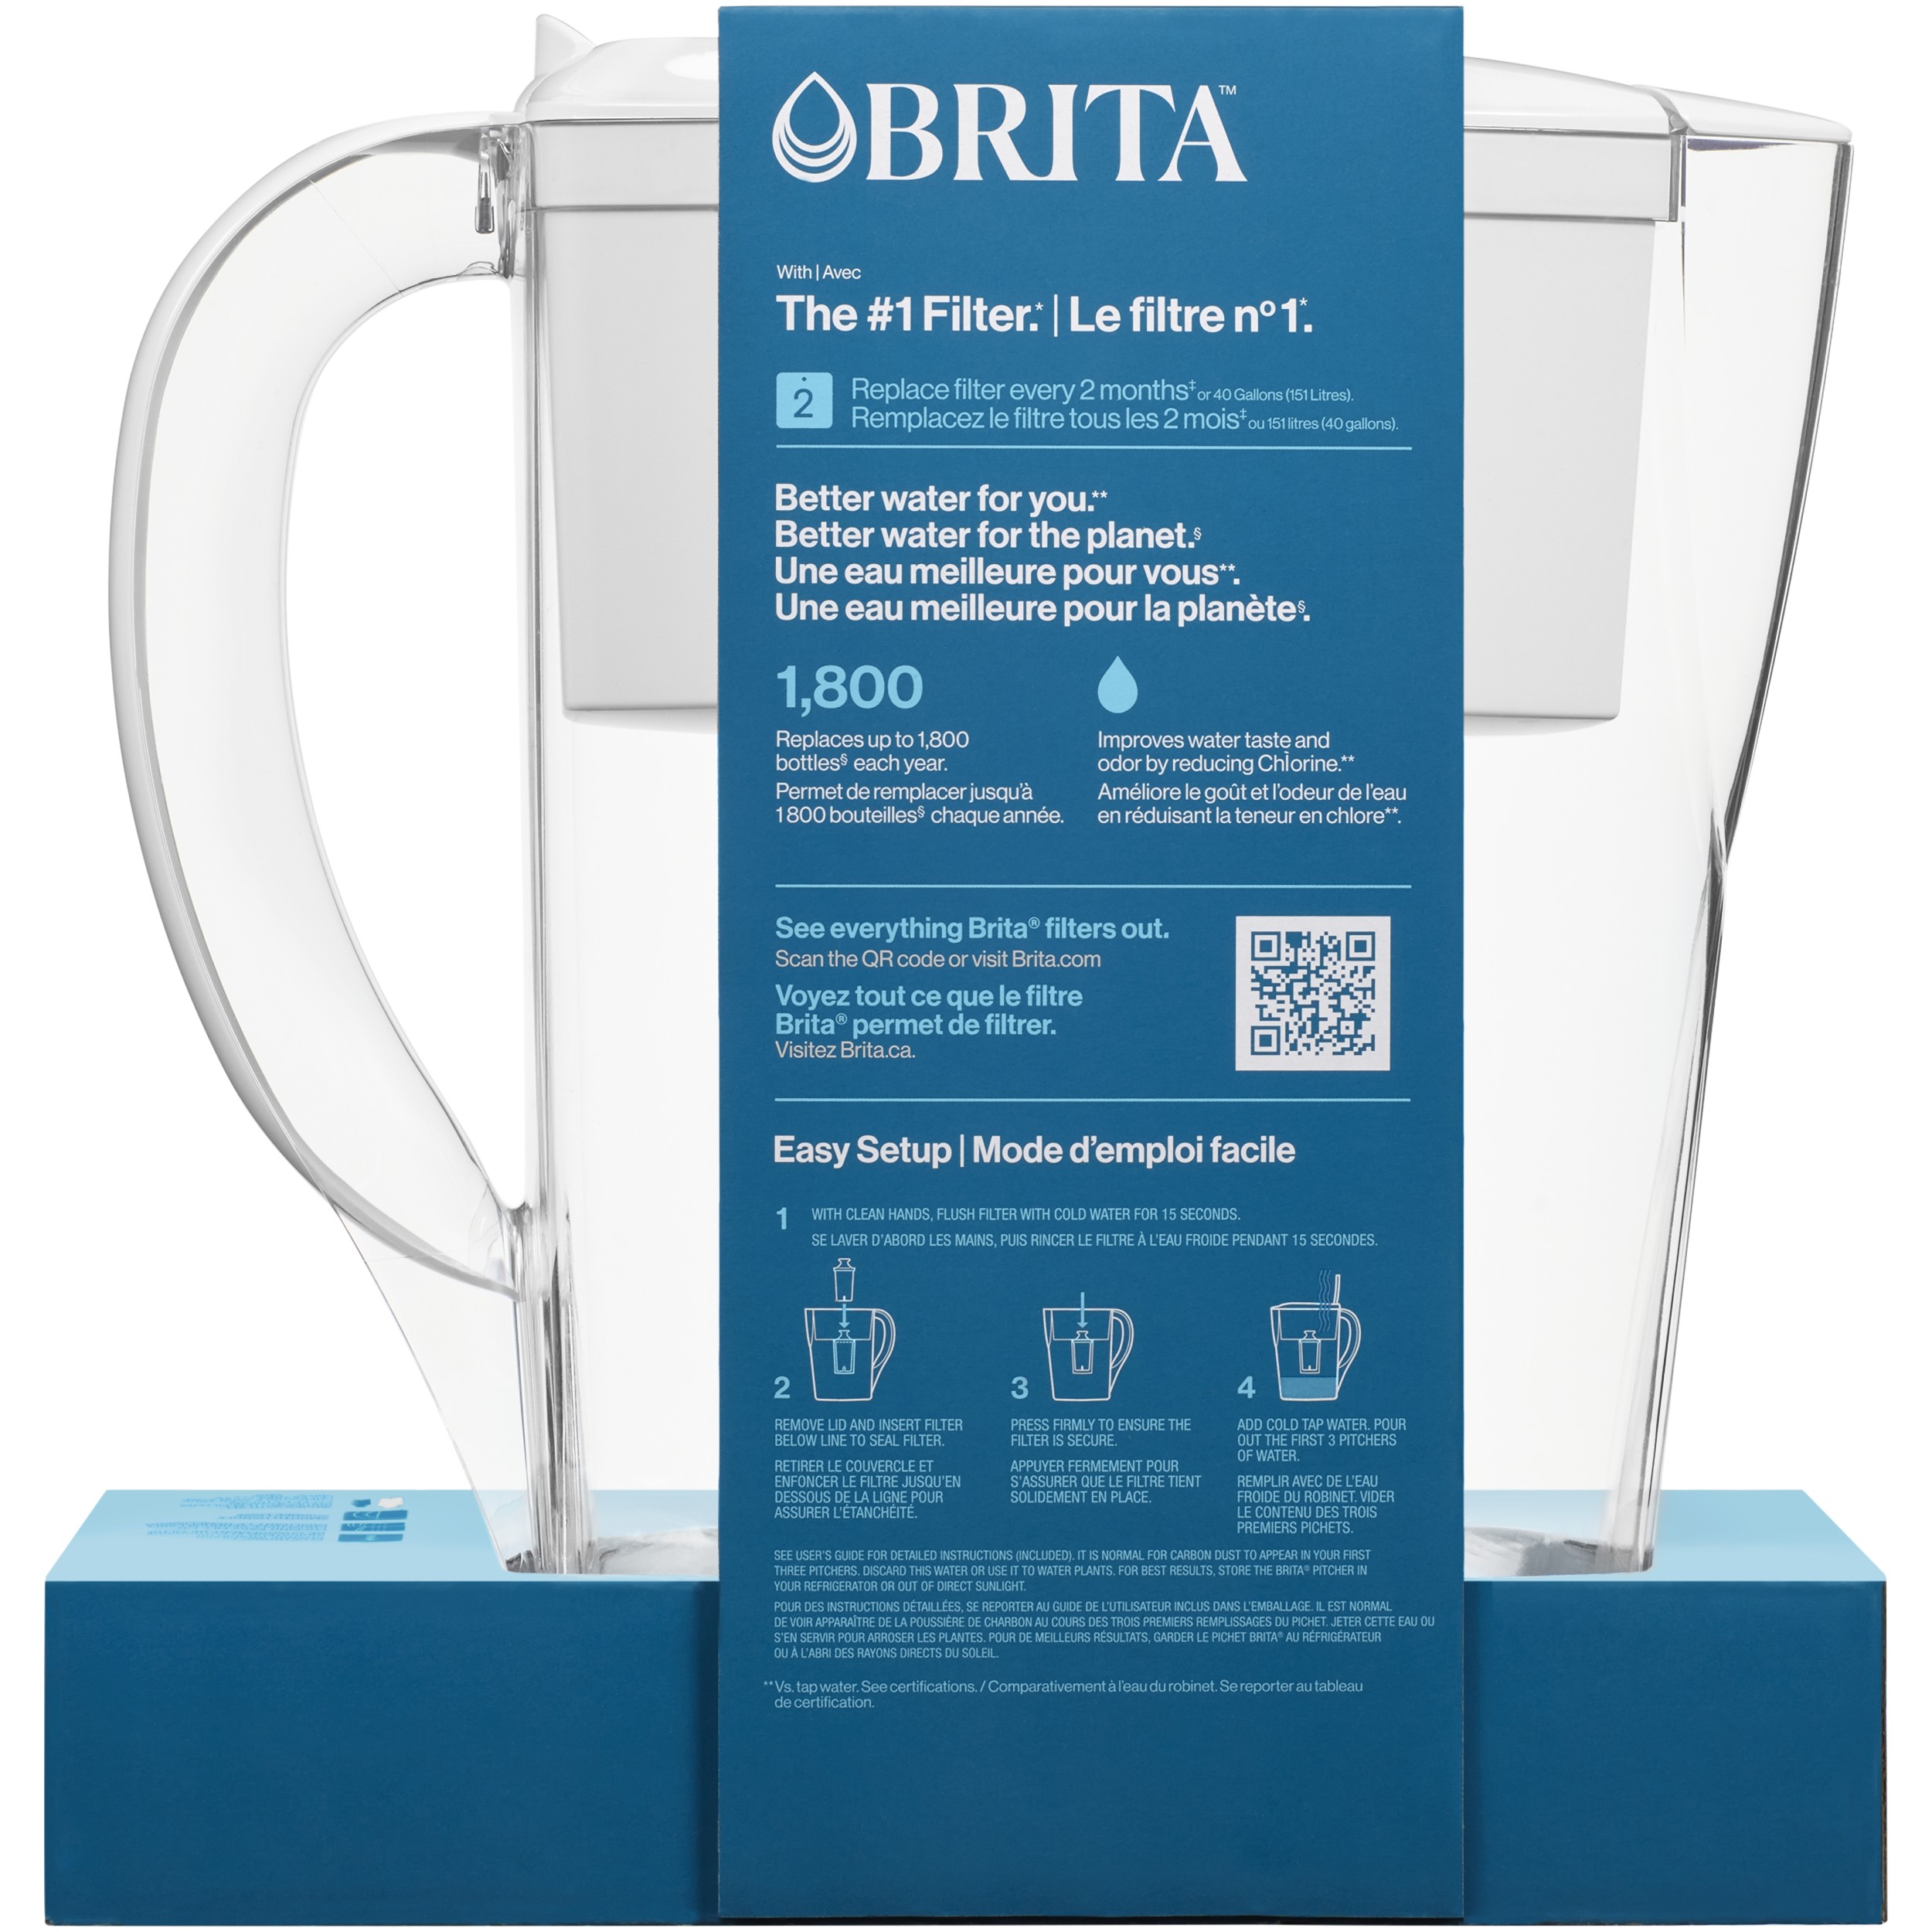 Brita Small 6 Cup Space Saver Water Filter Pitcher with 1 Standard Filter, Made Without BPA, Space Saver, White - image 4 of 10